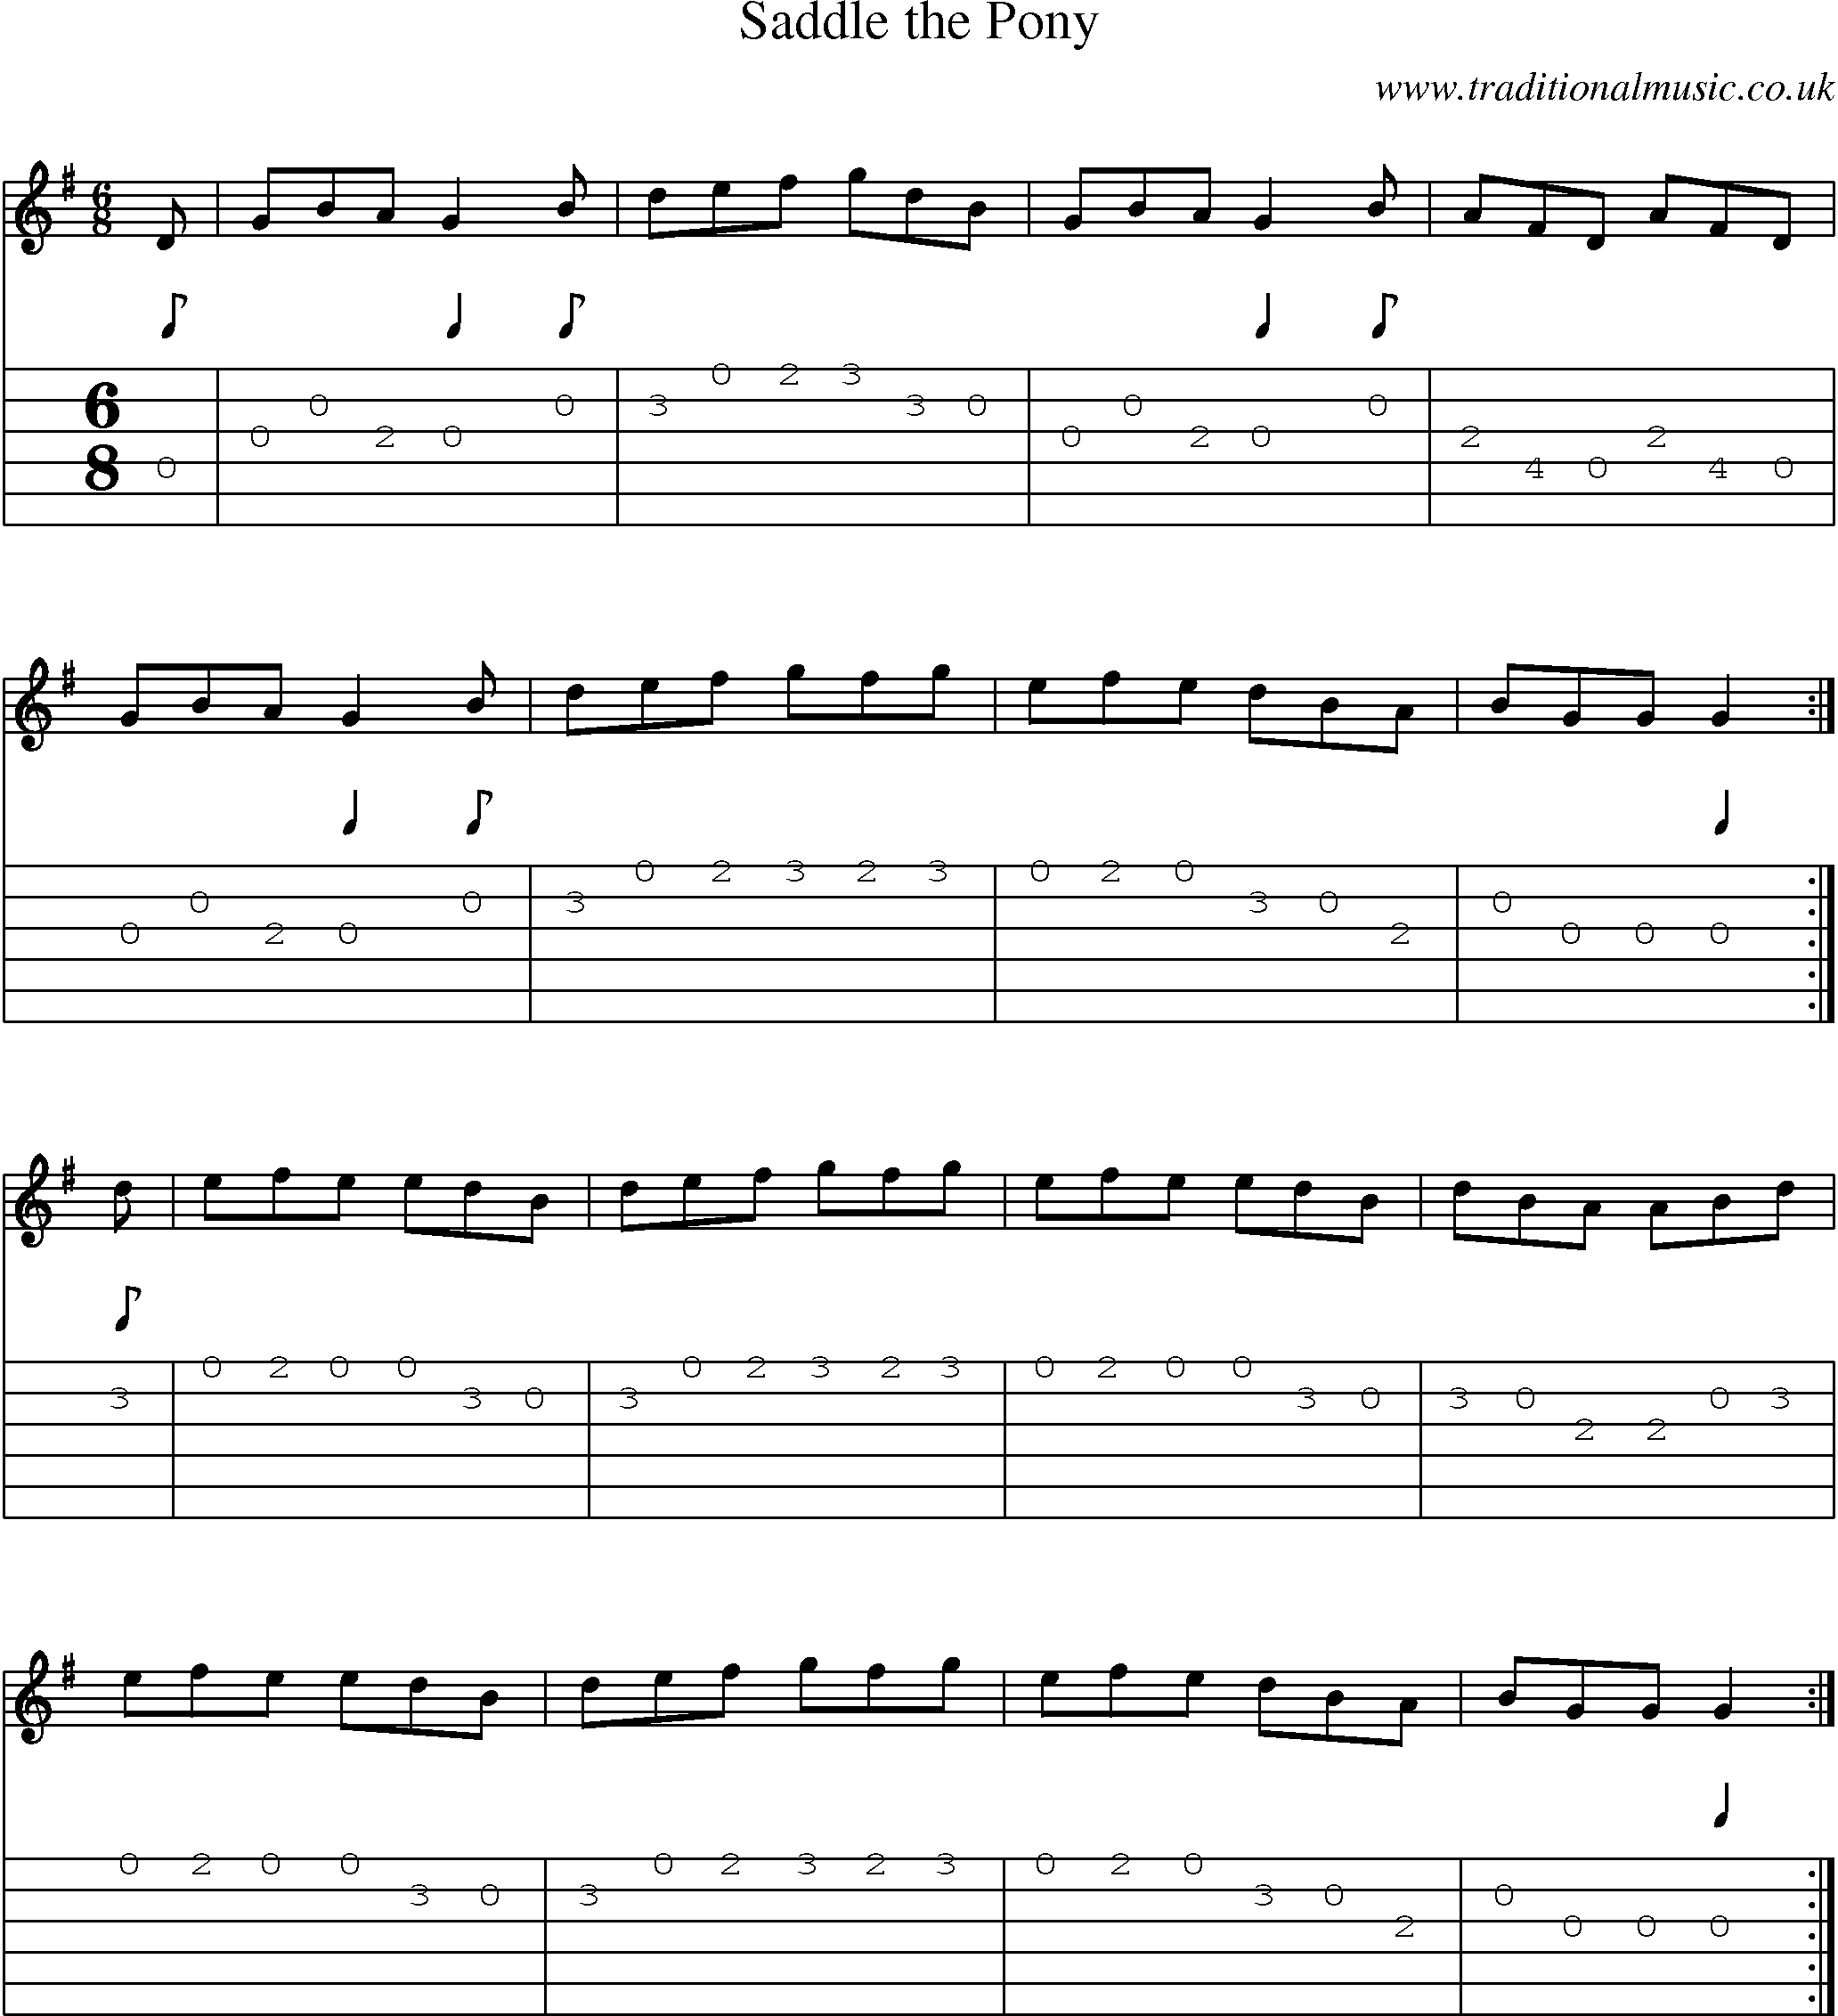 Music Score and Guitar Tabs for Saddle Pony